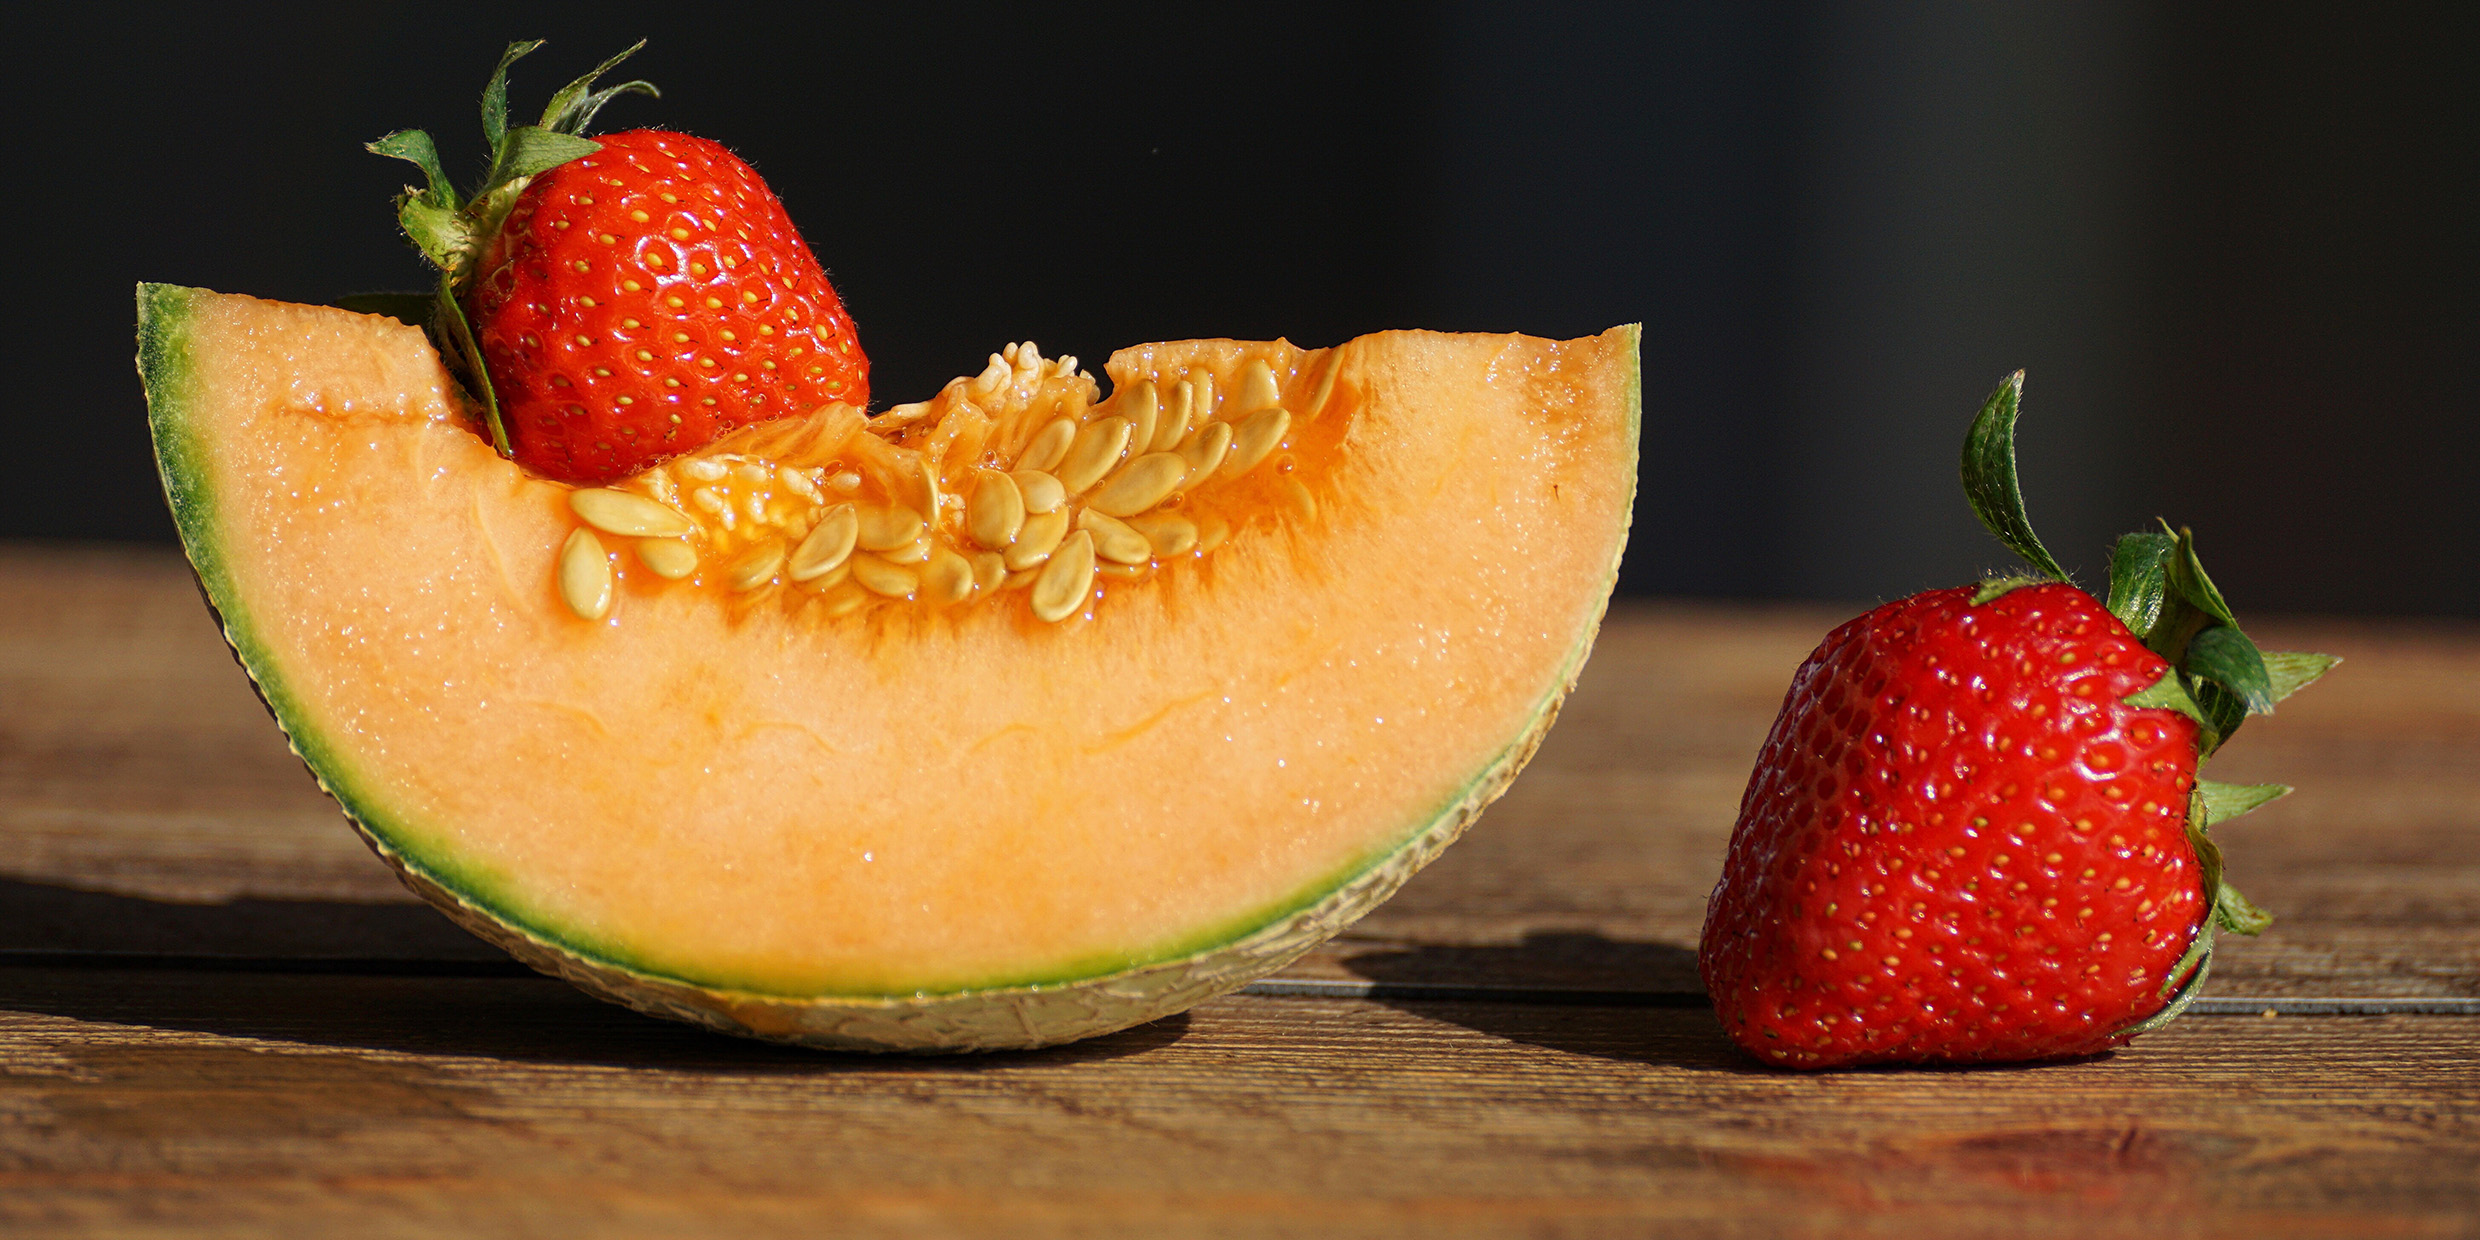 Image of cantaloupe and strawberries